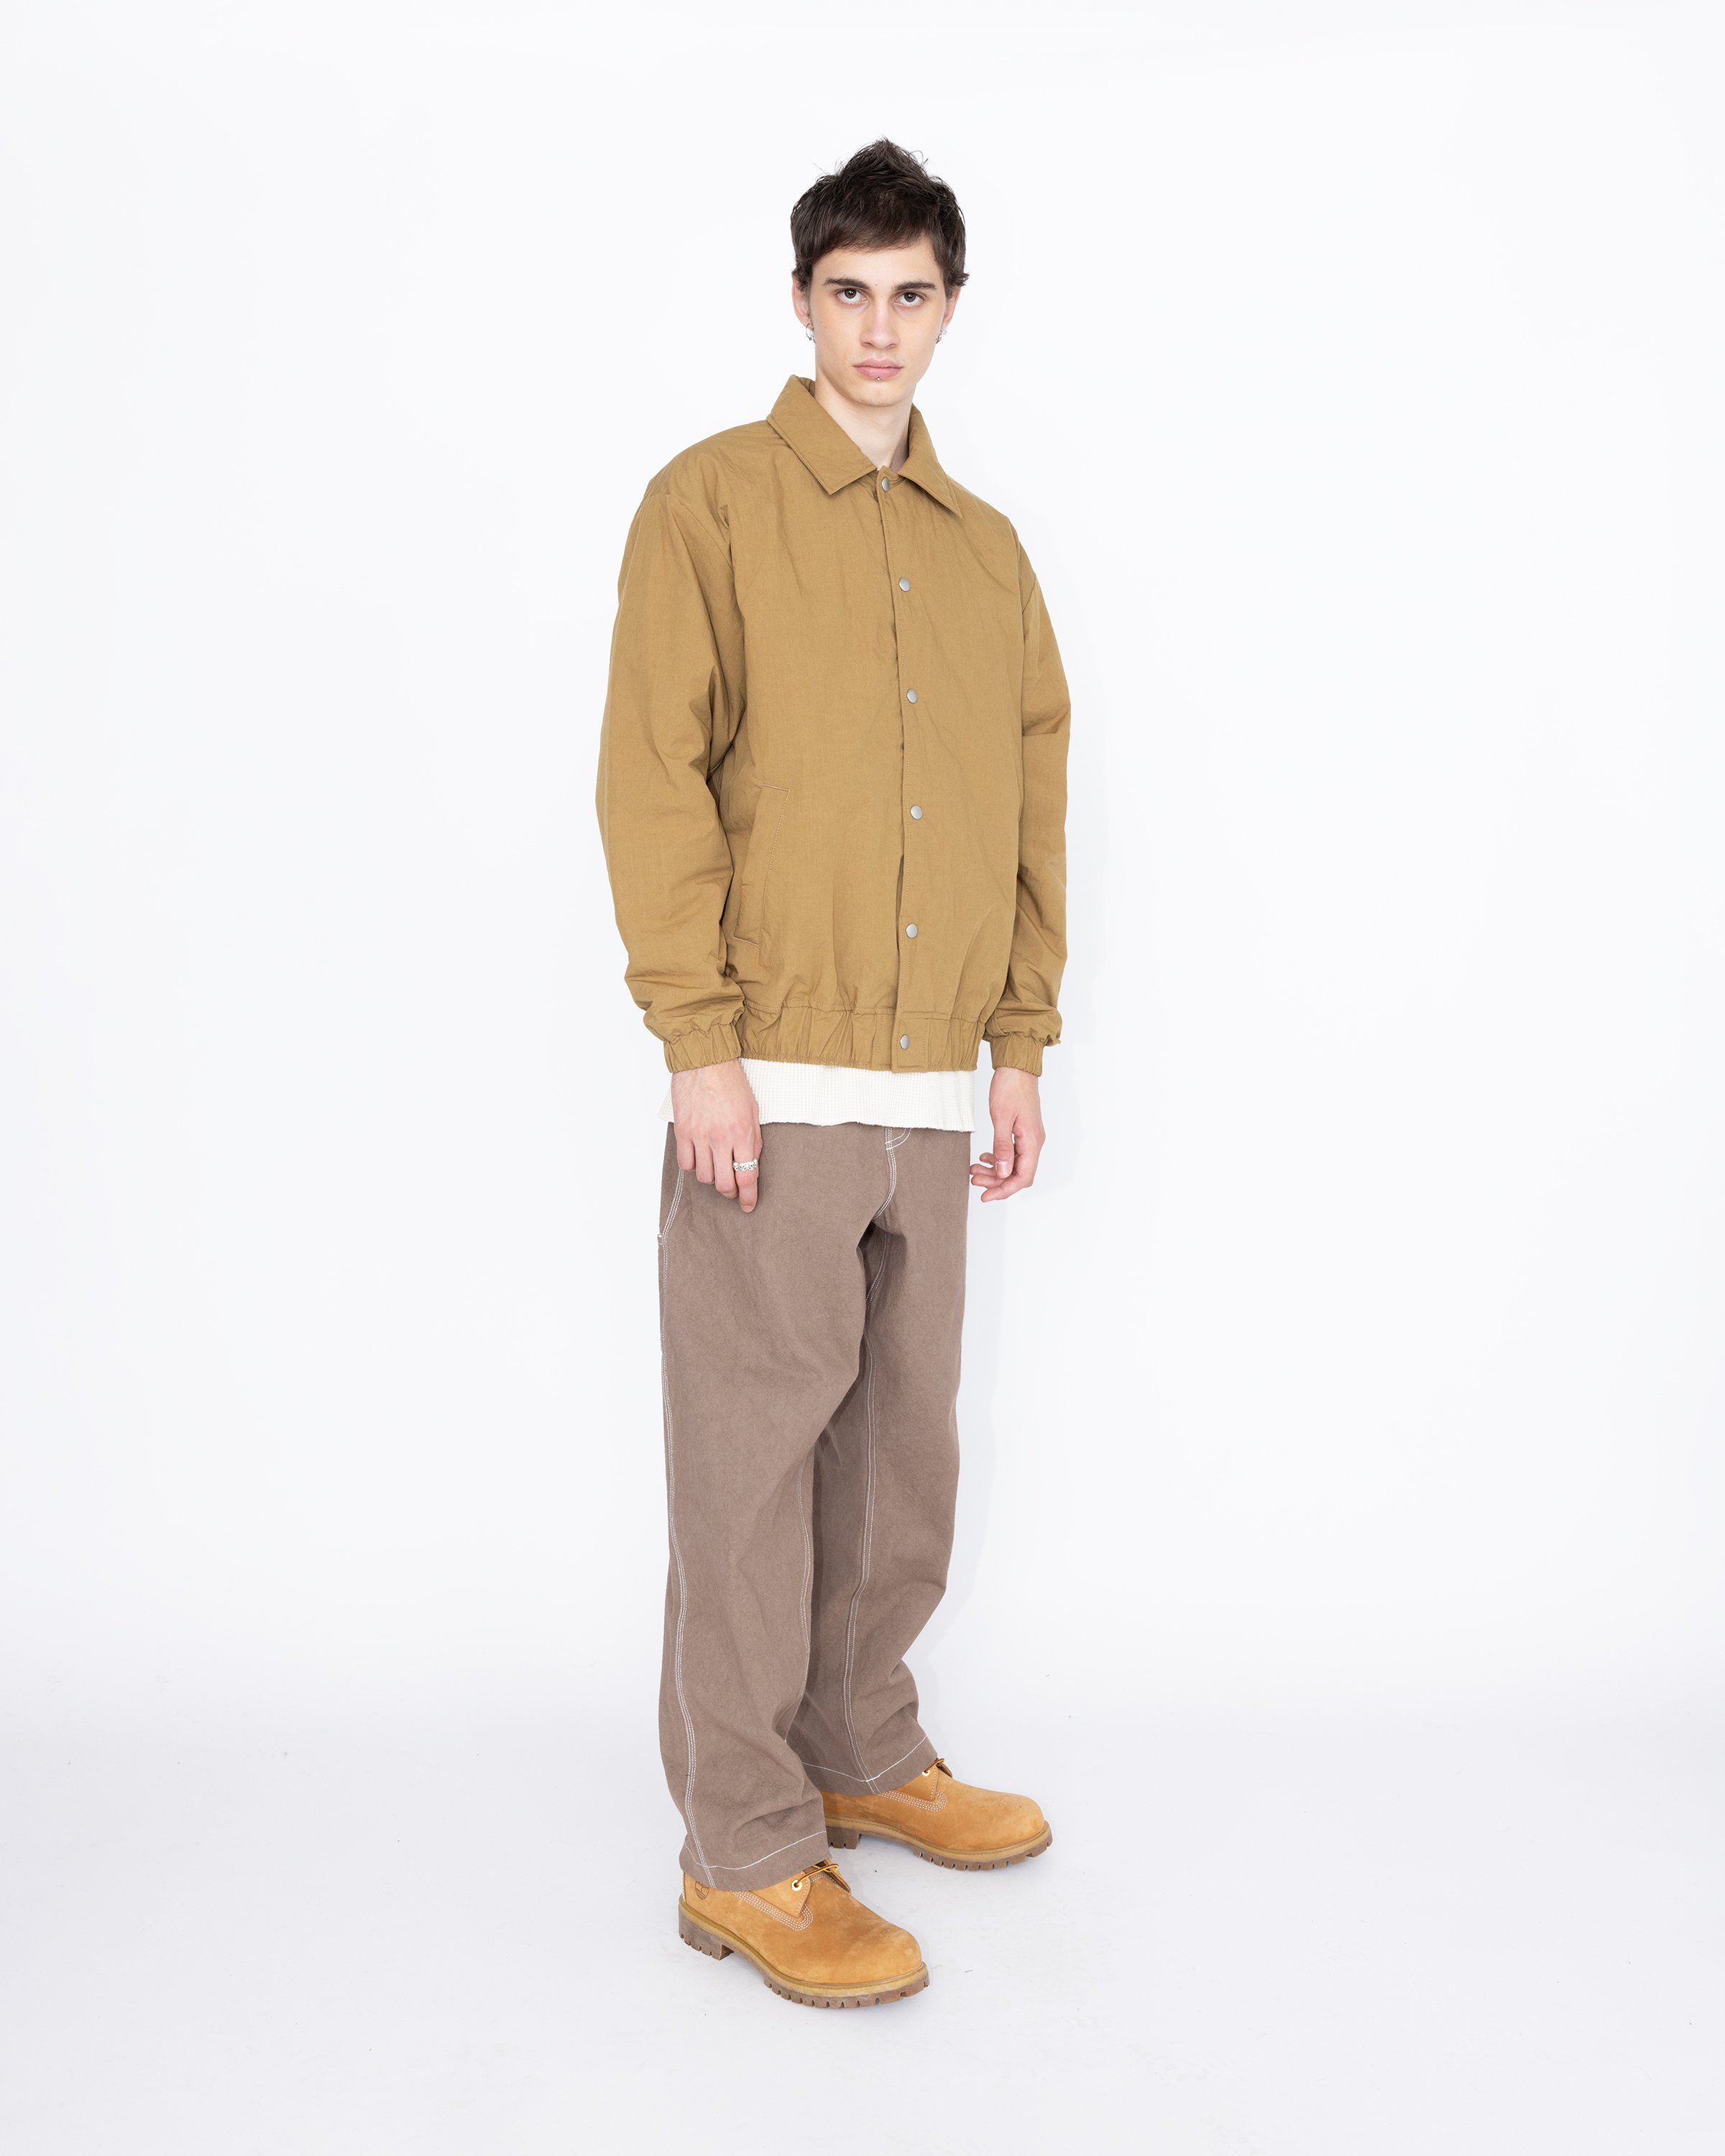 Highsnobiety HS05 - Reverse Piping Insulated Jacket Beige - Clothing - Beige - Image 4